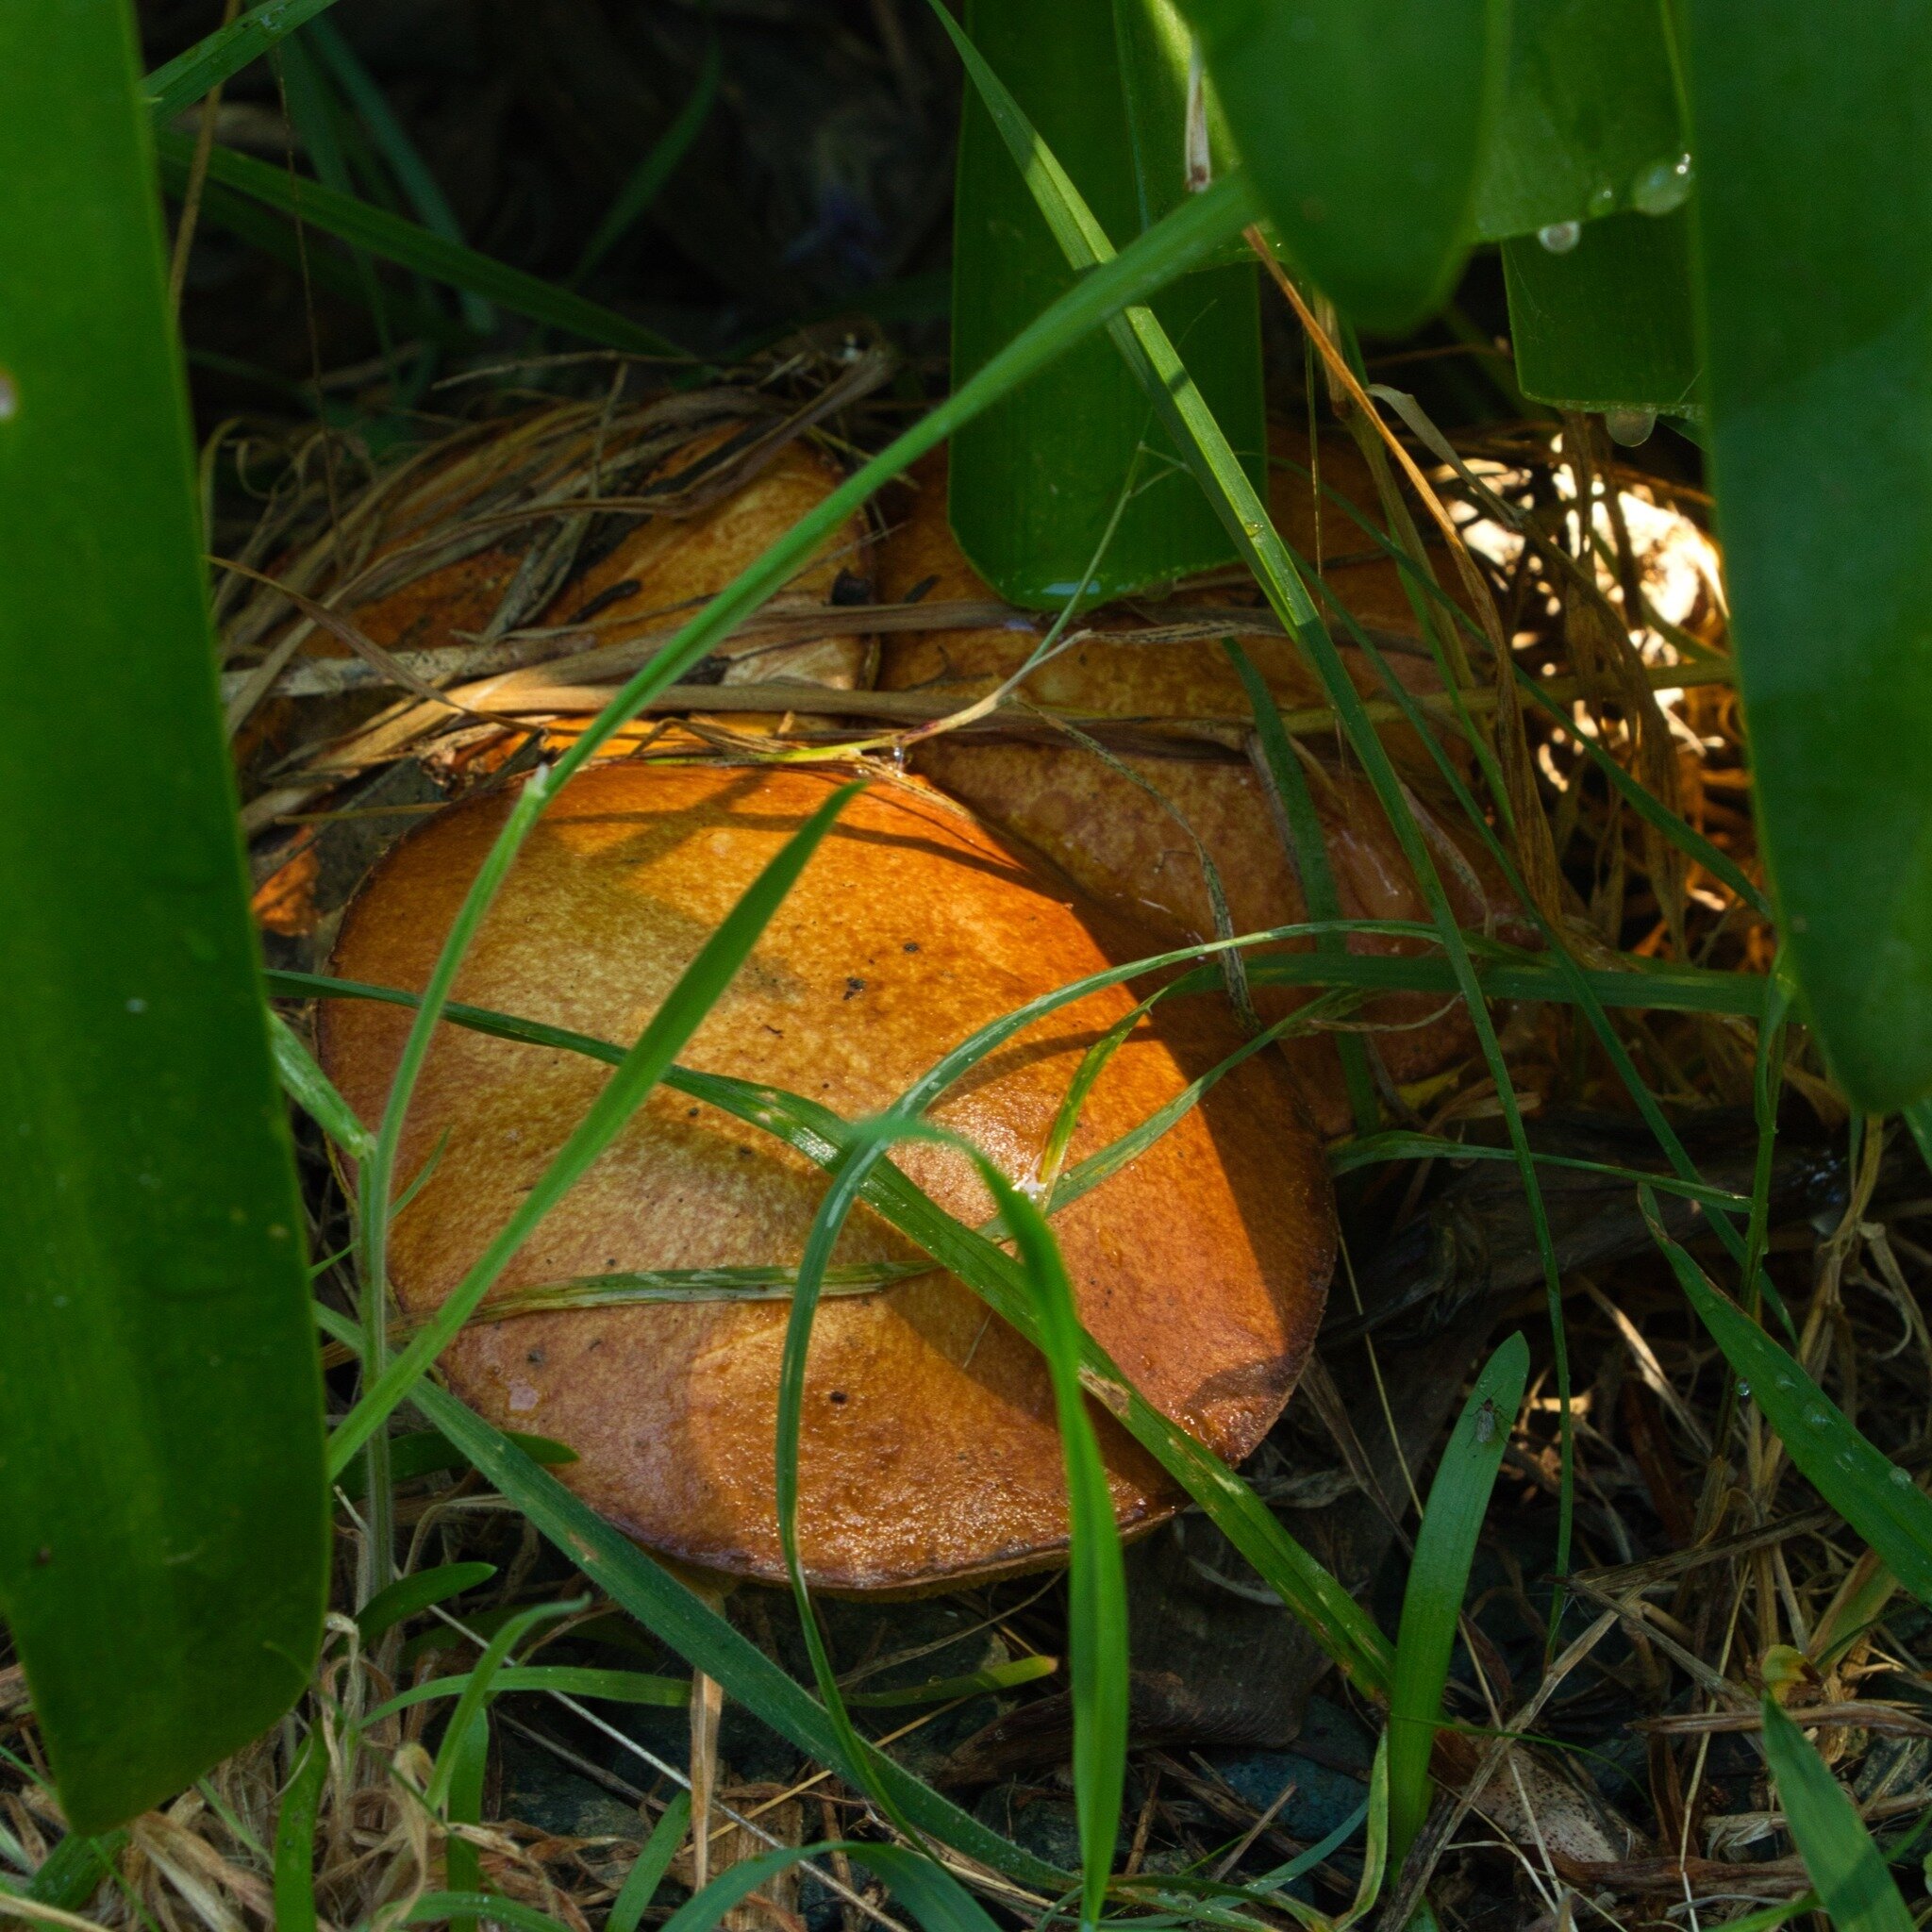 Autumn is here - so are the mushrooms.

These Suillus luteus or slippery jacks pop up right in the middle of our driveway. They are considered edible but there aren't the best eating, to be honest.

These mushrooms form a symbiotic relationship with 